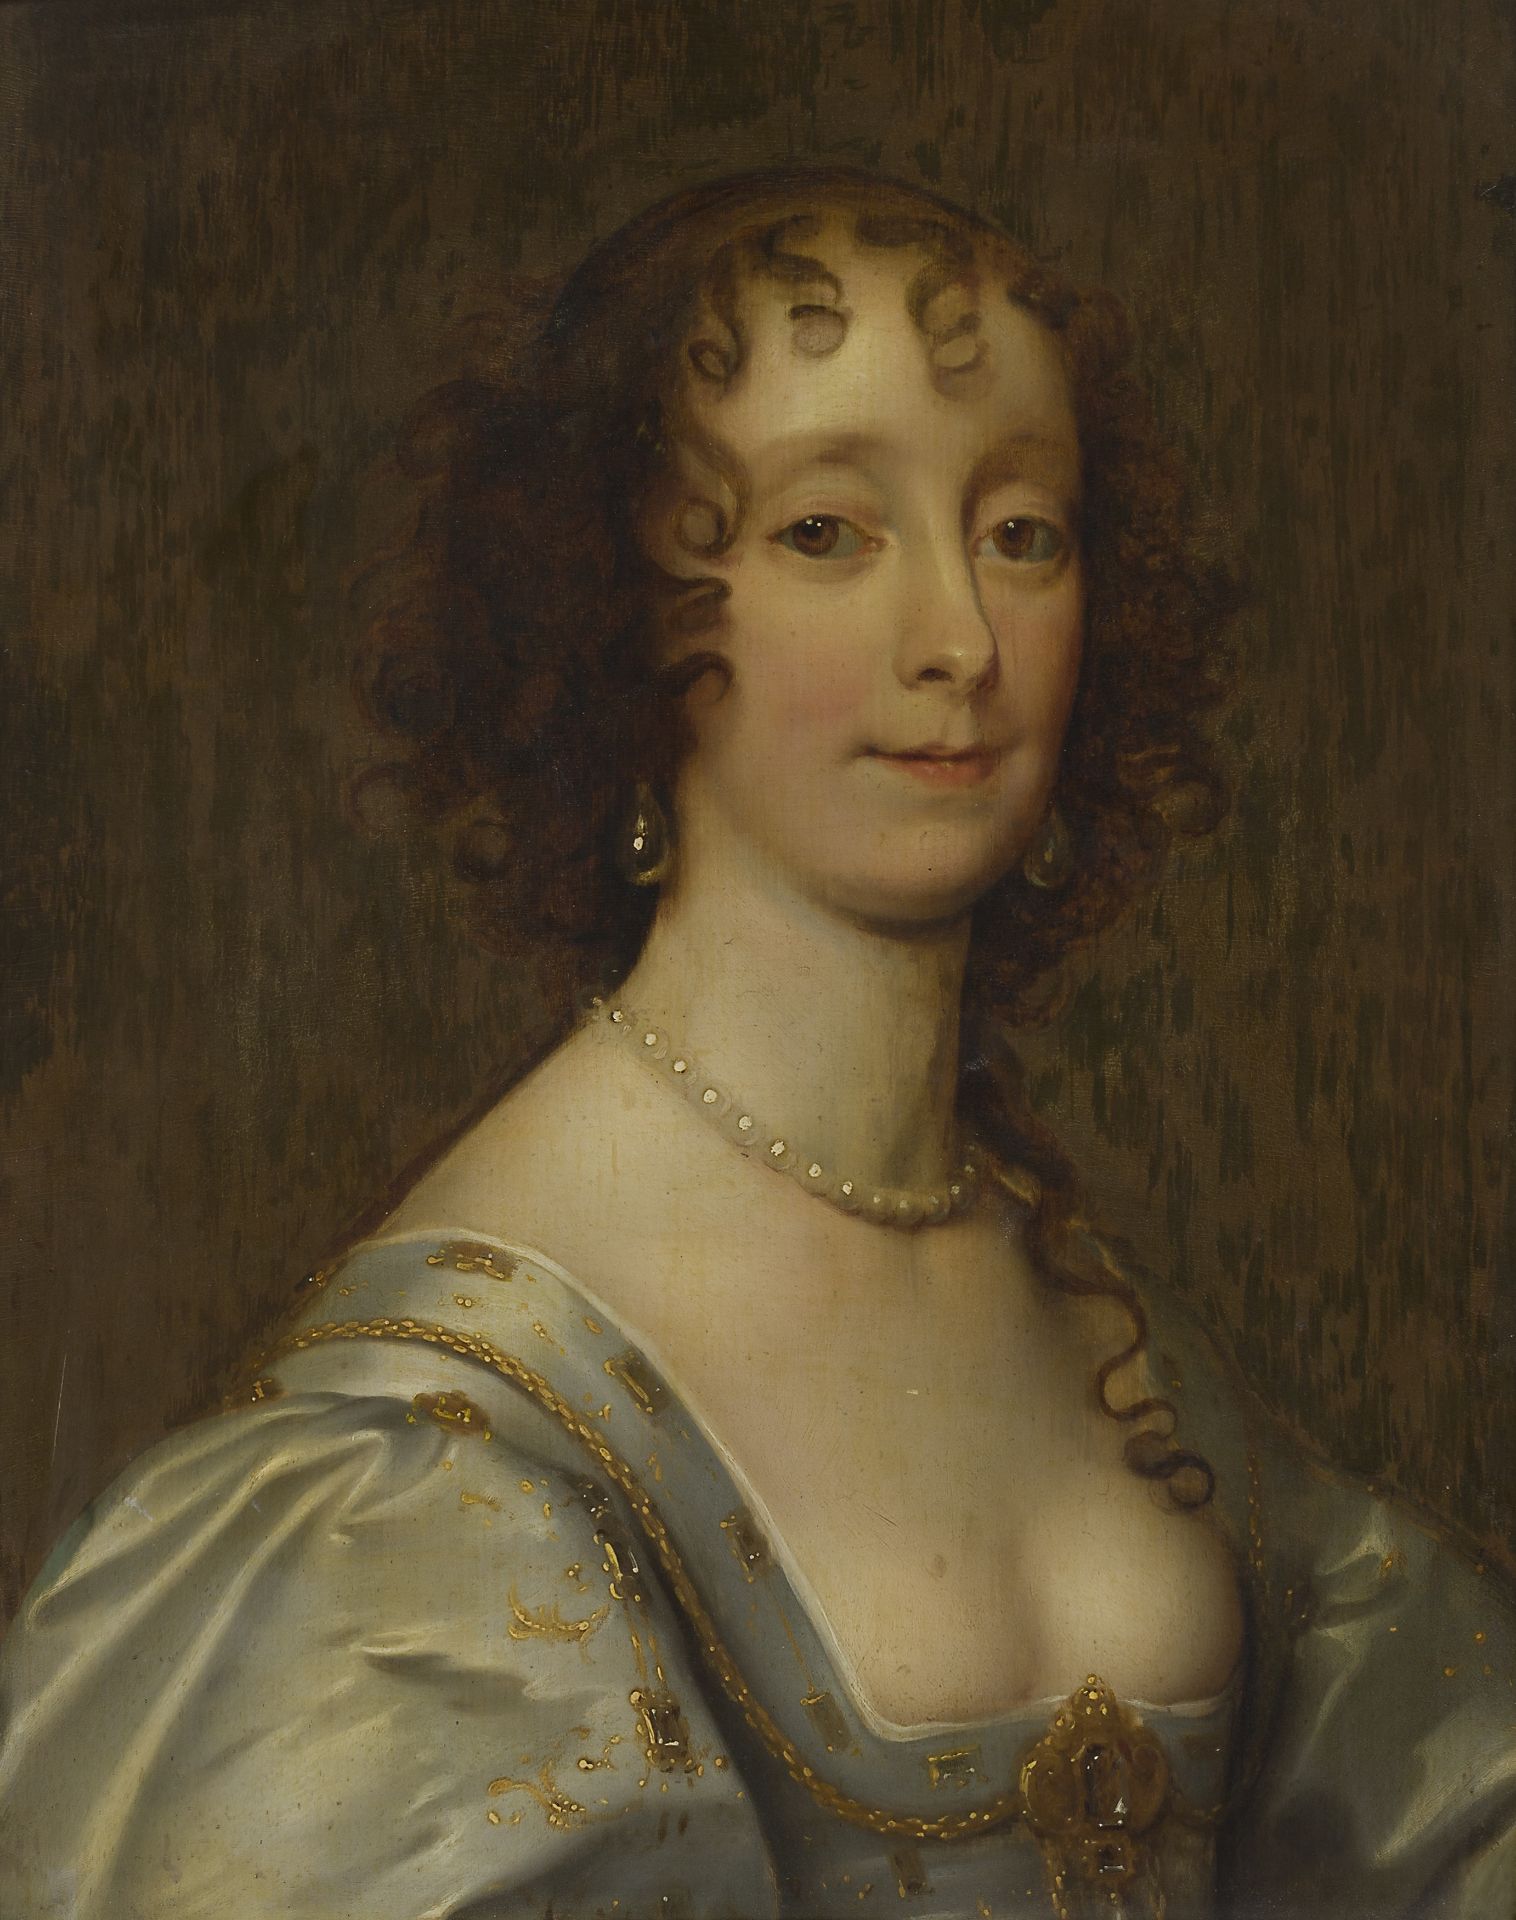 MANNER OF SIR PETER LELY PORTRAIT OF A LADY SAID TO BE LADY EVELYN